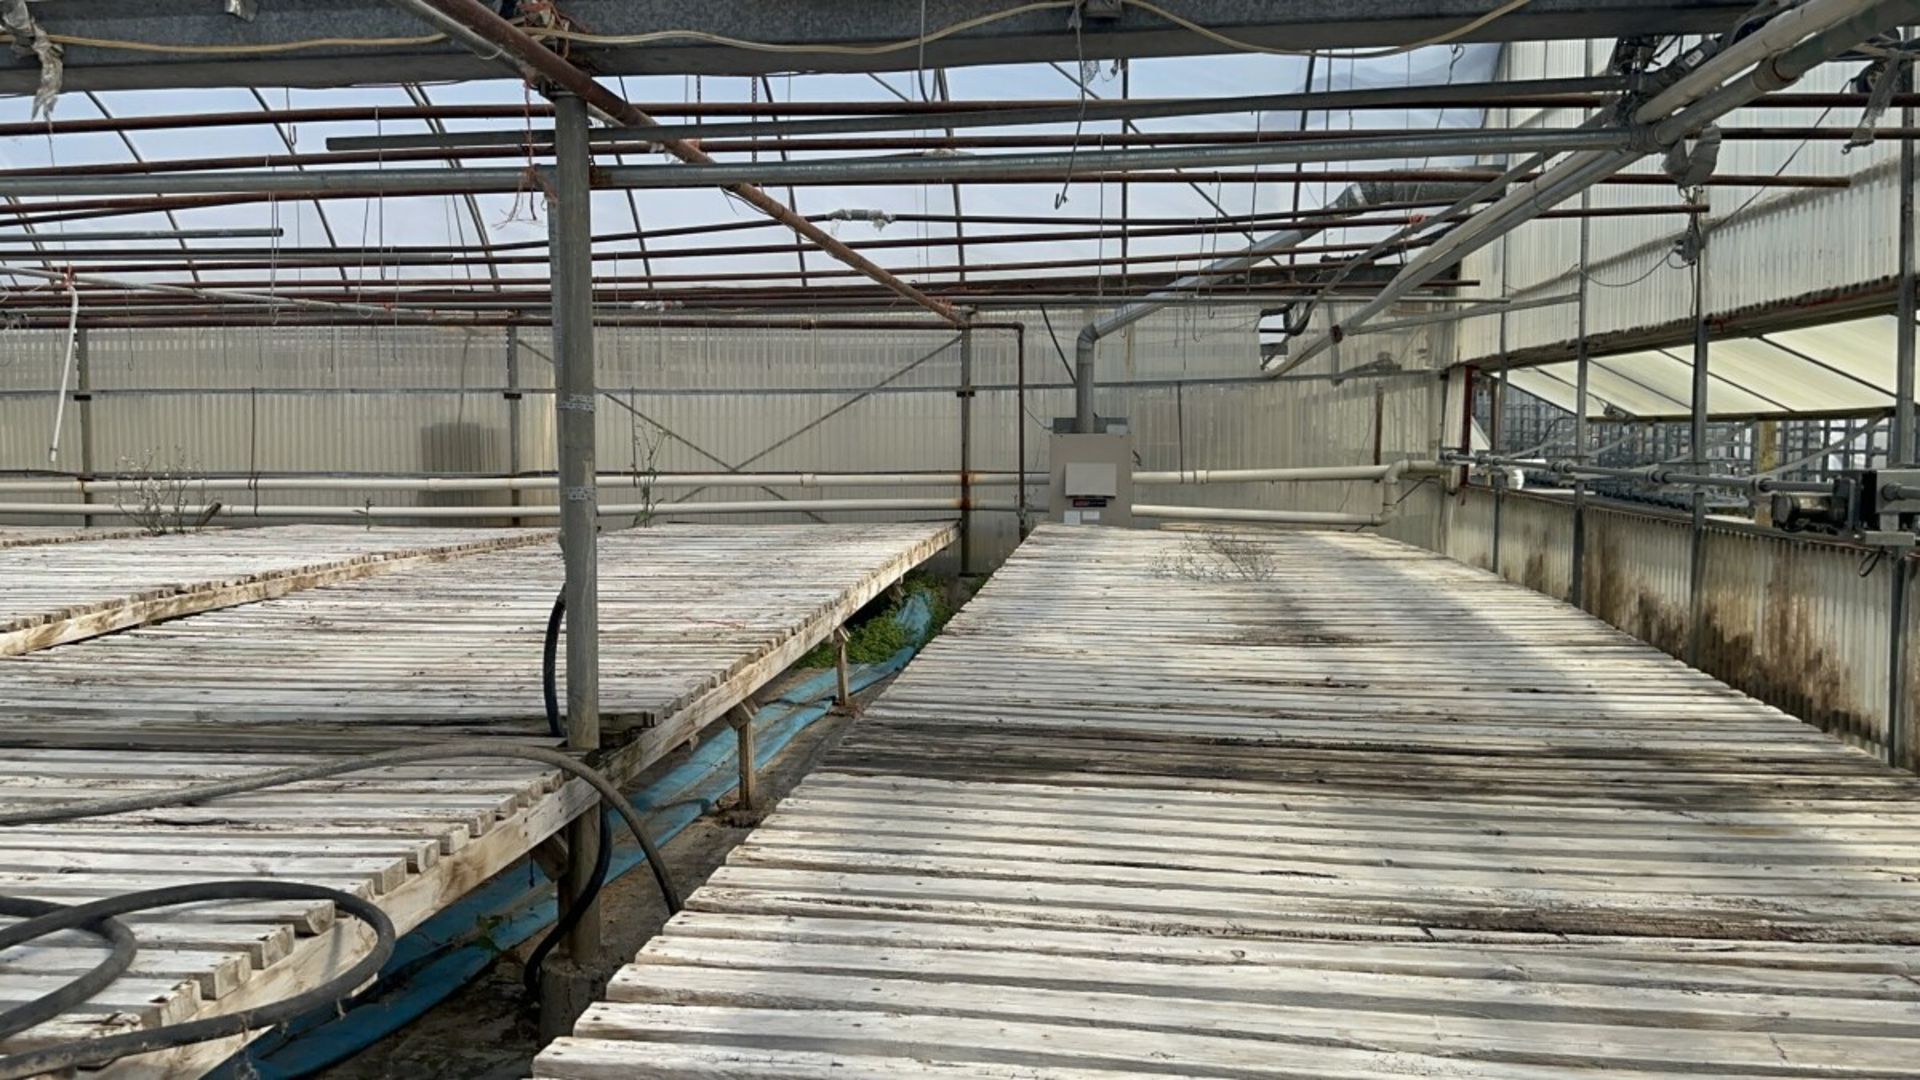 WESTBROOK GUTTER CONNECT 2-BAY GREENHOUSE 60FT X 144FT X 96” H & 2-BAY 60FT X 72 FT X 96”, INCLUDING - Image 92 of 95